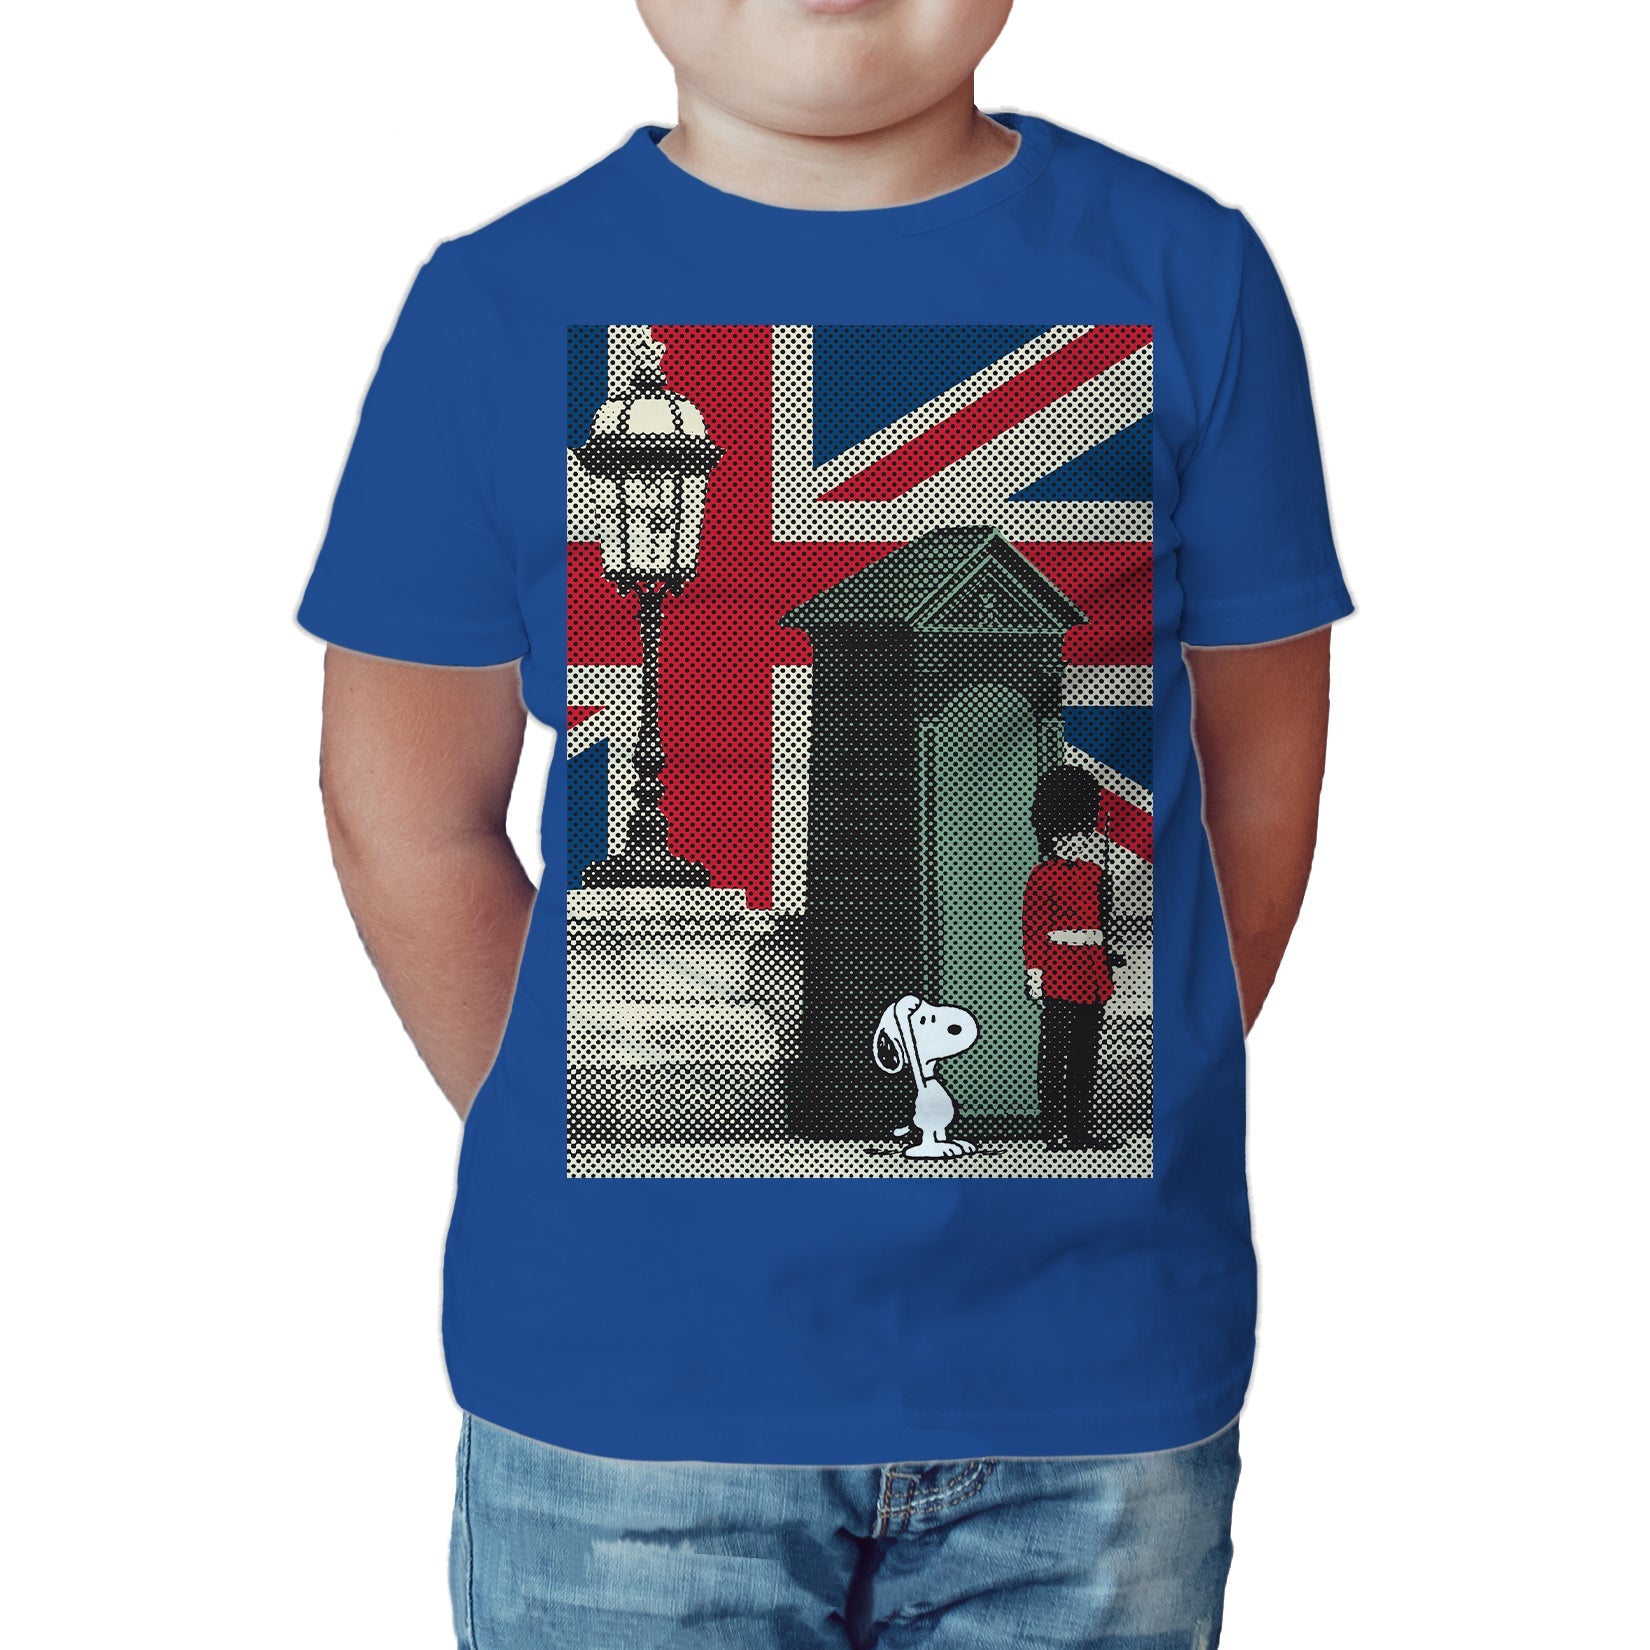 Peanuts Kids Snoopy Remix UK Beefeater Official Kid's T-Shirt